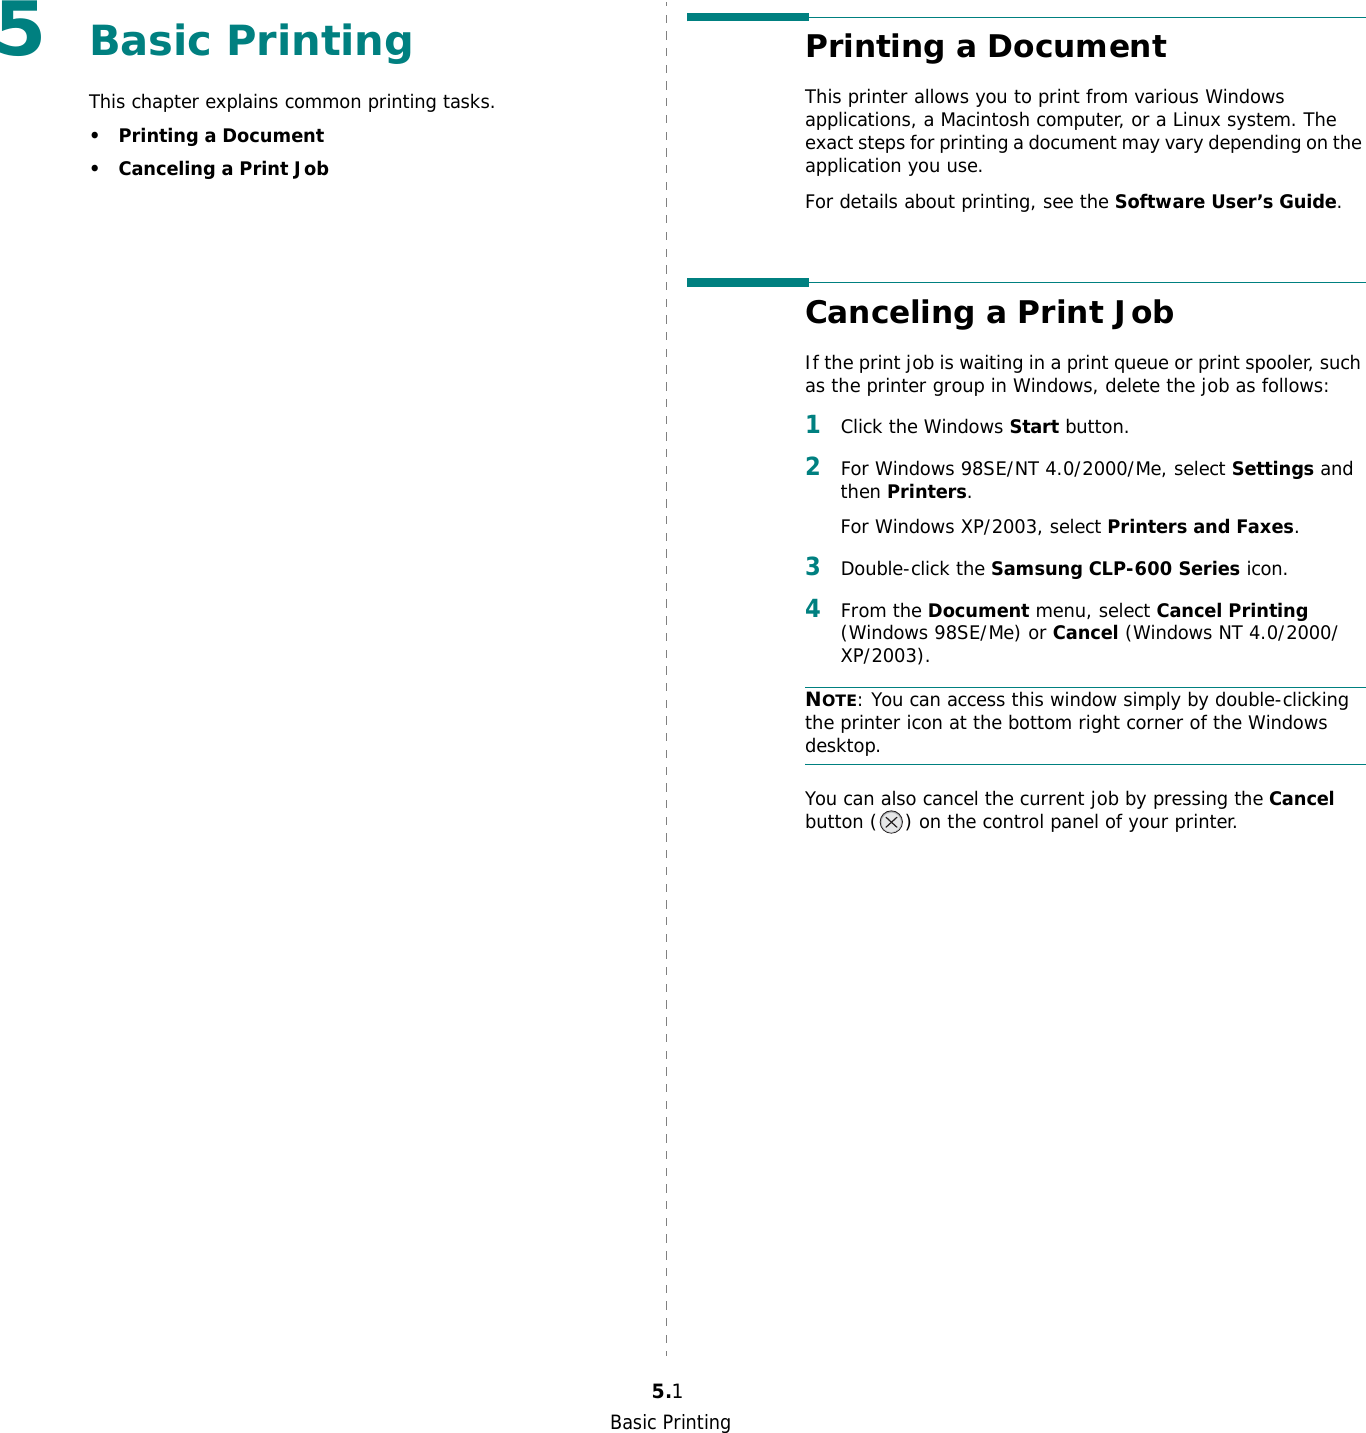 Basic Printing5.15Basic Printing This chapter explains common printing tasks.• Printing a Document• Canceling a Print JobPrinting a DocumentThis printer allows you to print from various Windows applications, a Macintosh computer, or a Linux system. The exact steps for printing a document may vary depending on the application you use. For details about printing, see the Software User’s Guide.Canceling a Print JobIf the print job is waiting in a print queue or print spooler, such as the printer group in Windows, delete the job as follows:1Click the Windows Start button.2For Windows 98SE/NT 4.0/2000/Me, select Settings and then Printers.For Windows XP/2003, select Printers and Faxes.3Double-click the Samsung CLP-600 Series icon.4From the Document menu, select Cancel Printing (Windows 98SE/Me) or Cancel (Windows NT 4.0/2000/XP/2003).NOTE: You can access this window simply by double-clicking the printer icon at the bottom right corner of the Windows desktop.You can also cancel the current job by pressing the Cancel button ( ) on the control panel of your printer.